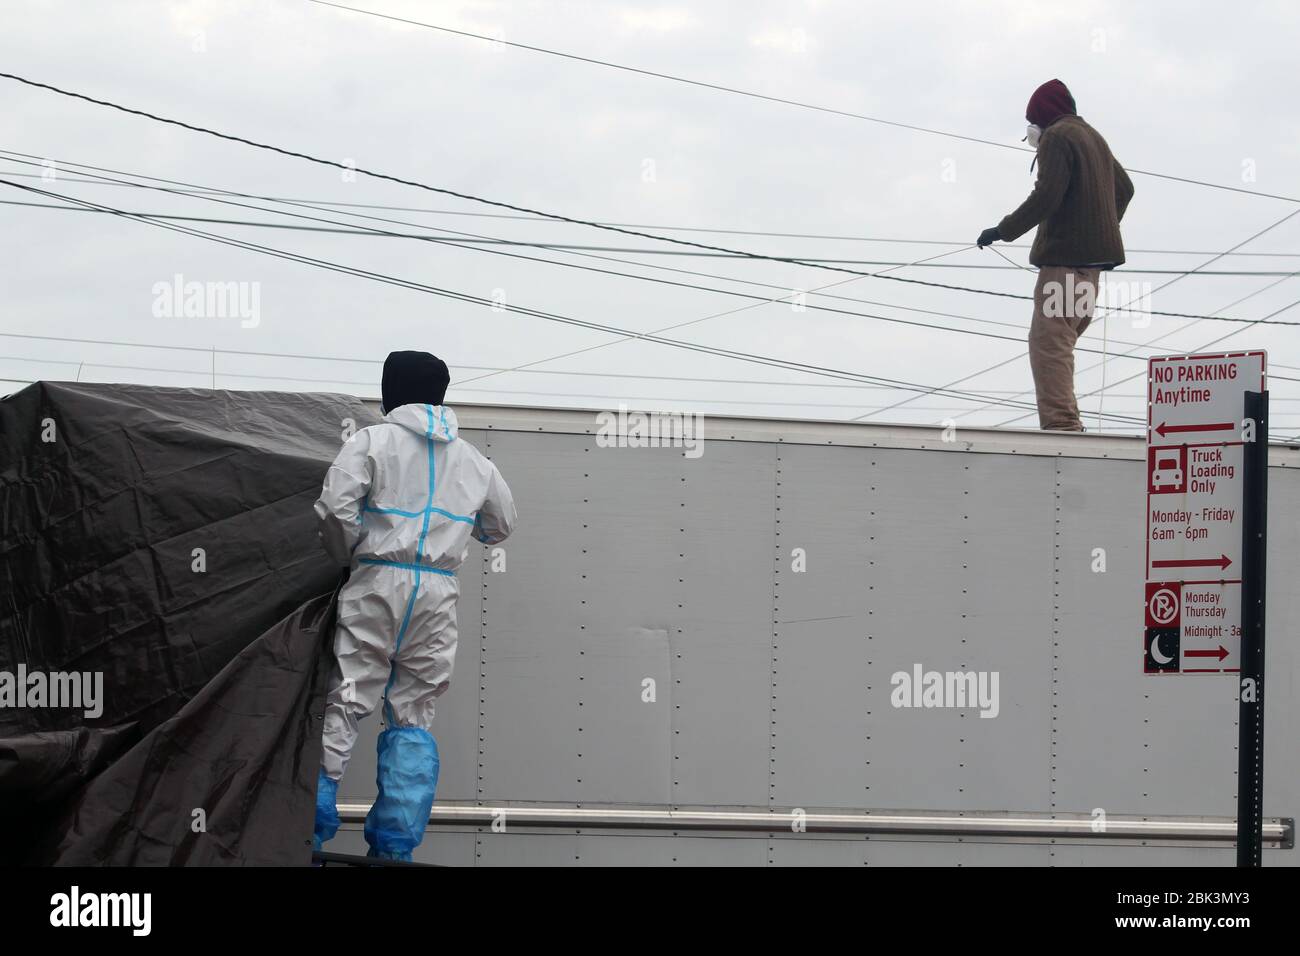 April 30, 2020, New York, New York, USA: One of these 2 workers climbed on the roof of a large refrigerated truck to deploy a tarp in front of the Andrew T. Cleckley Funeral Home in Brooklyn where bodies not properly cared are removed. 60 corpses were stored in 4 non-refrigerated trucks lining the street along stores. Neighbors reported a foul smell and fluids dripping from the trucks. Some remains were also found lying on the facilityÃ¢â‚¬â„¢s floor. In New York City alone, there have been almost 13,000 COVID-19 deaths. (Credit Image: © Marie Le Ble/ZUMA Wire) Stock Photo